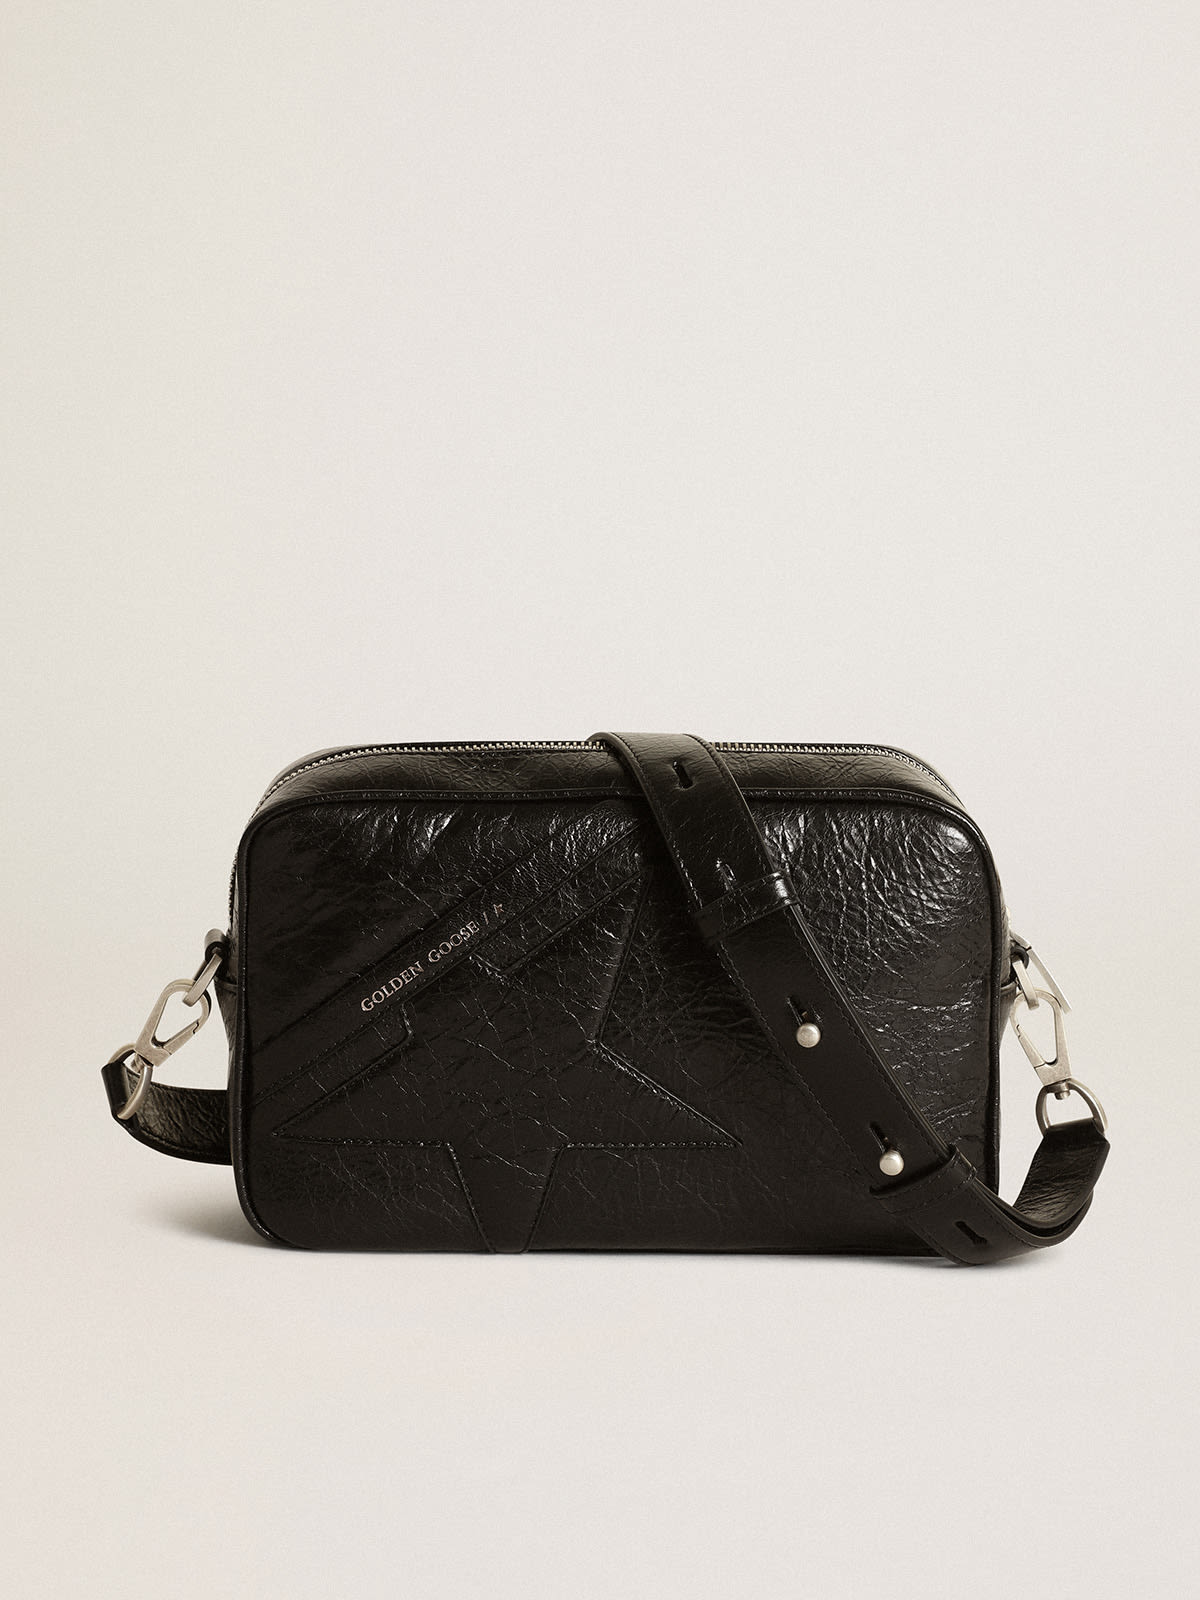 Golden Goose - Star Bag in glossy black leather with tone-on-tone star in 